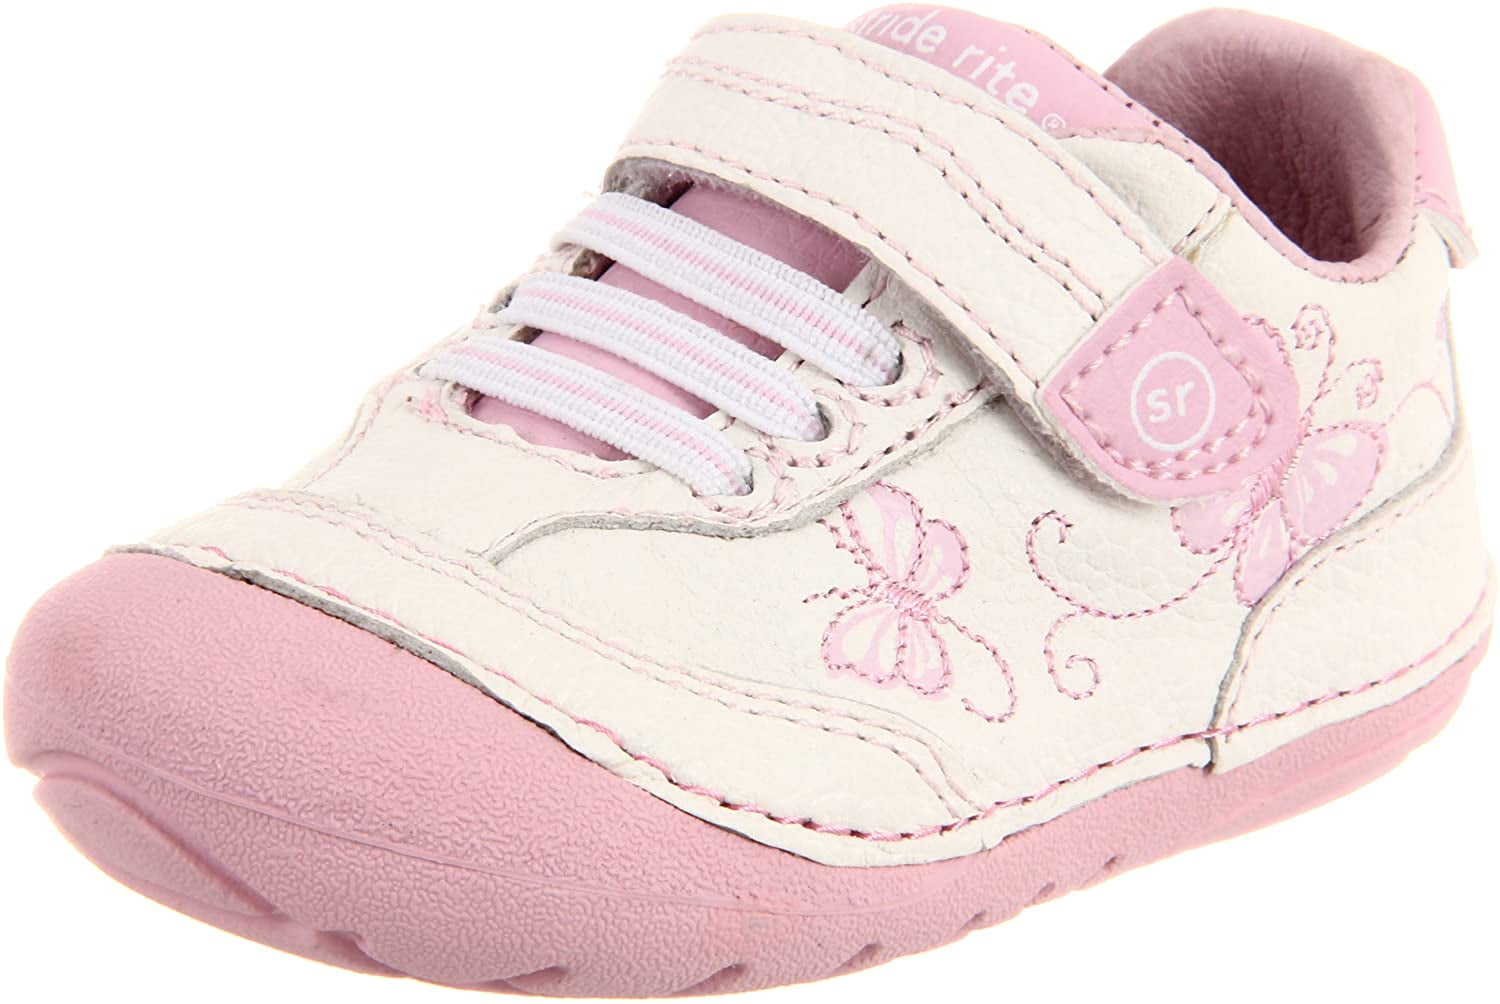 stride rite pink shoes